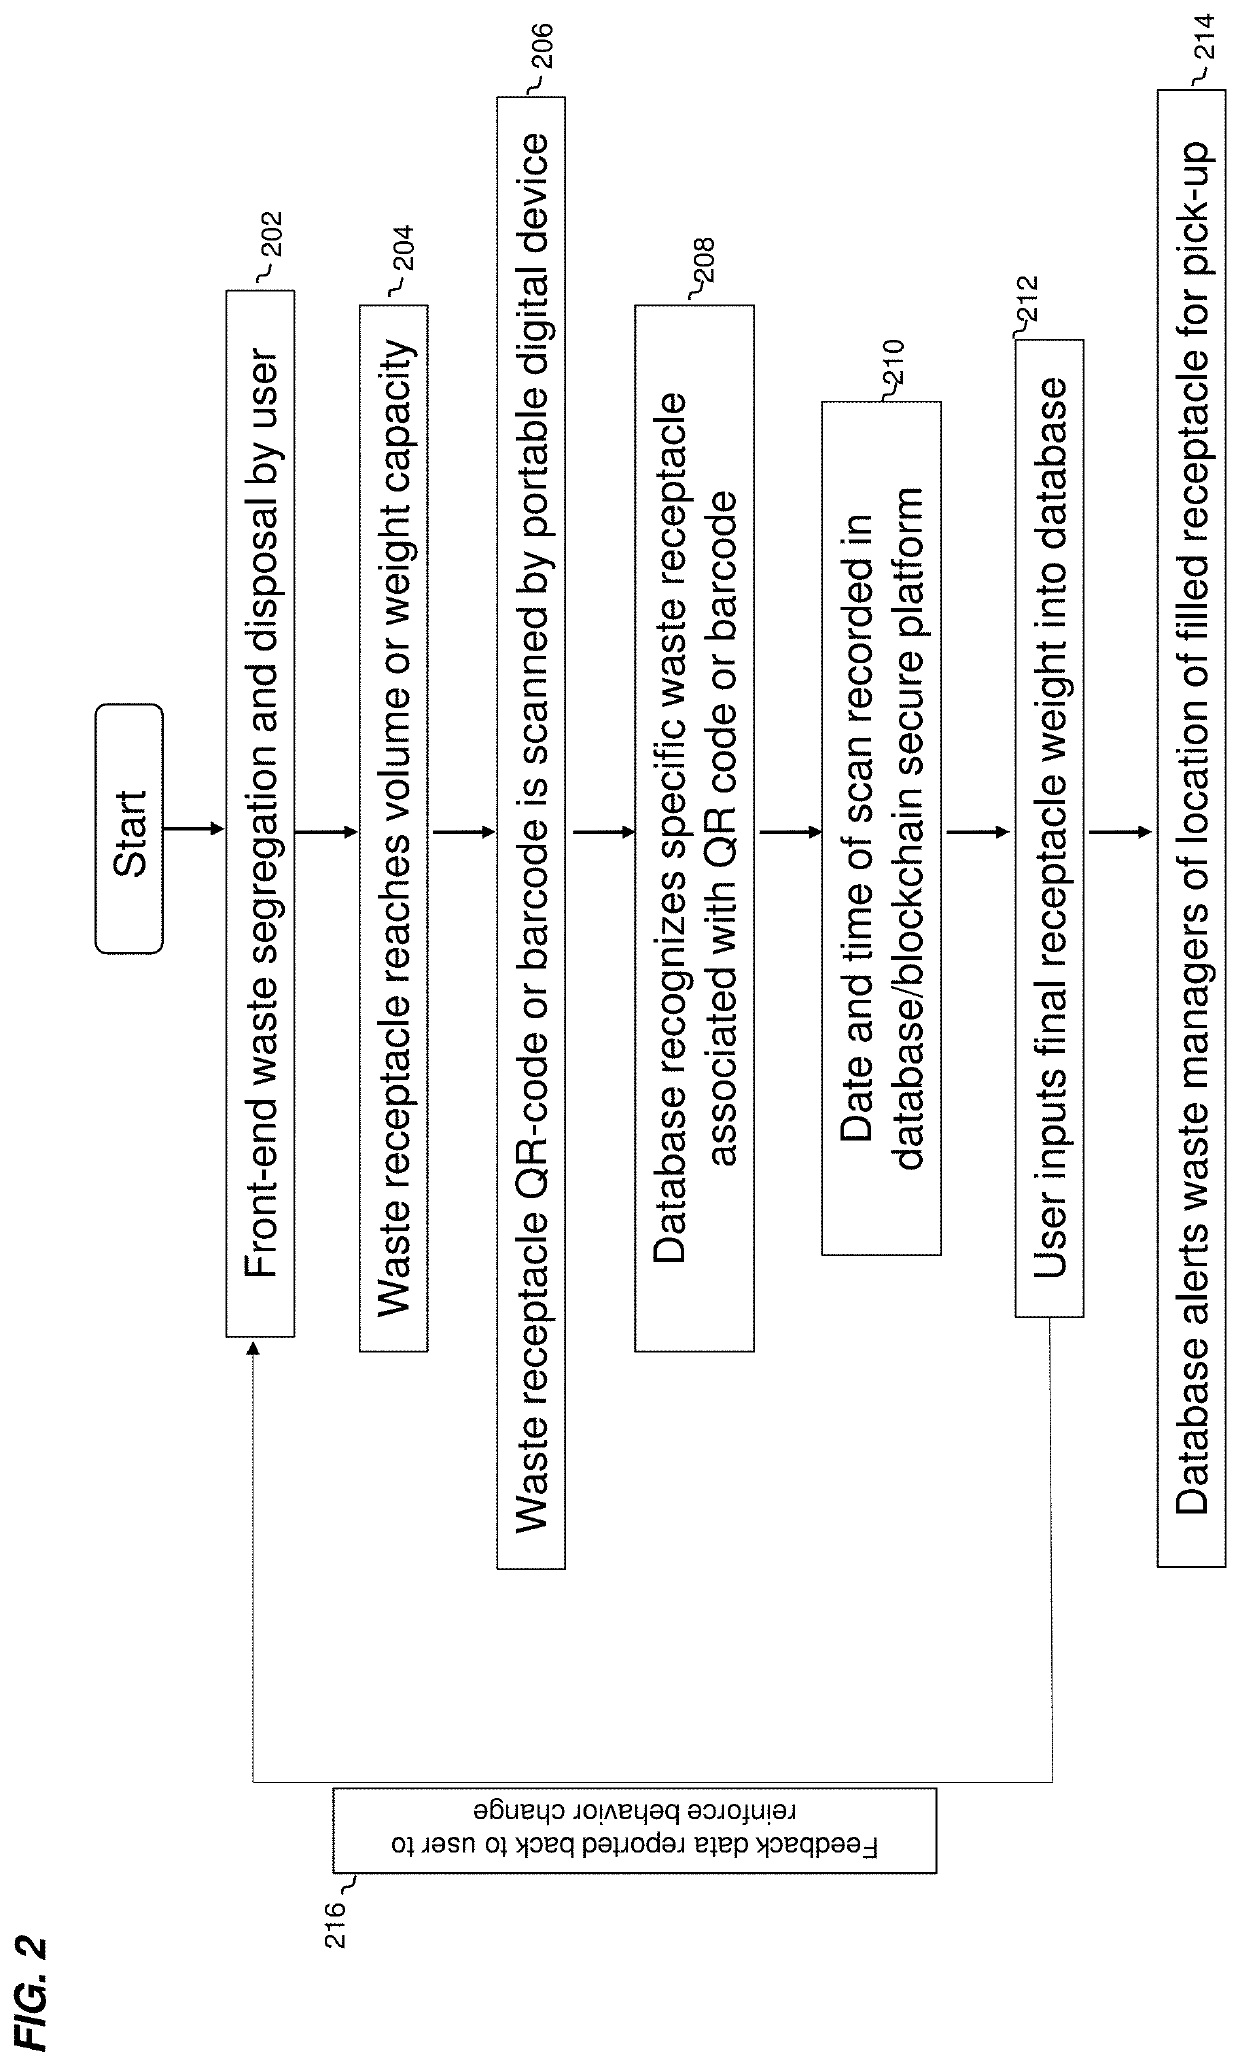 Plastic articles made from the segregation, decontamination, and purification of biomedical waste plastics in a system leveraging waste production data to modify material purification and product manufacturing